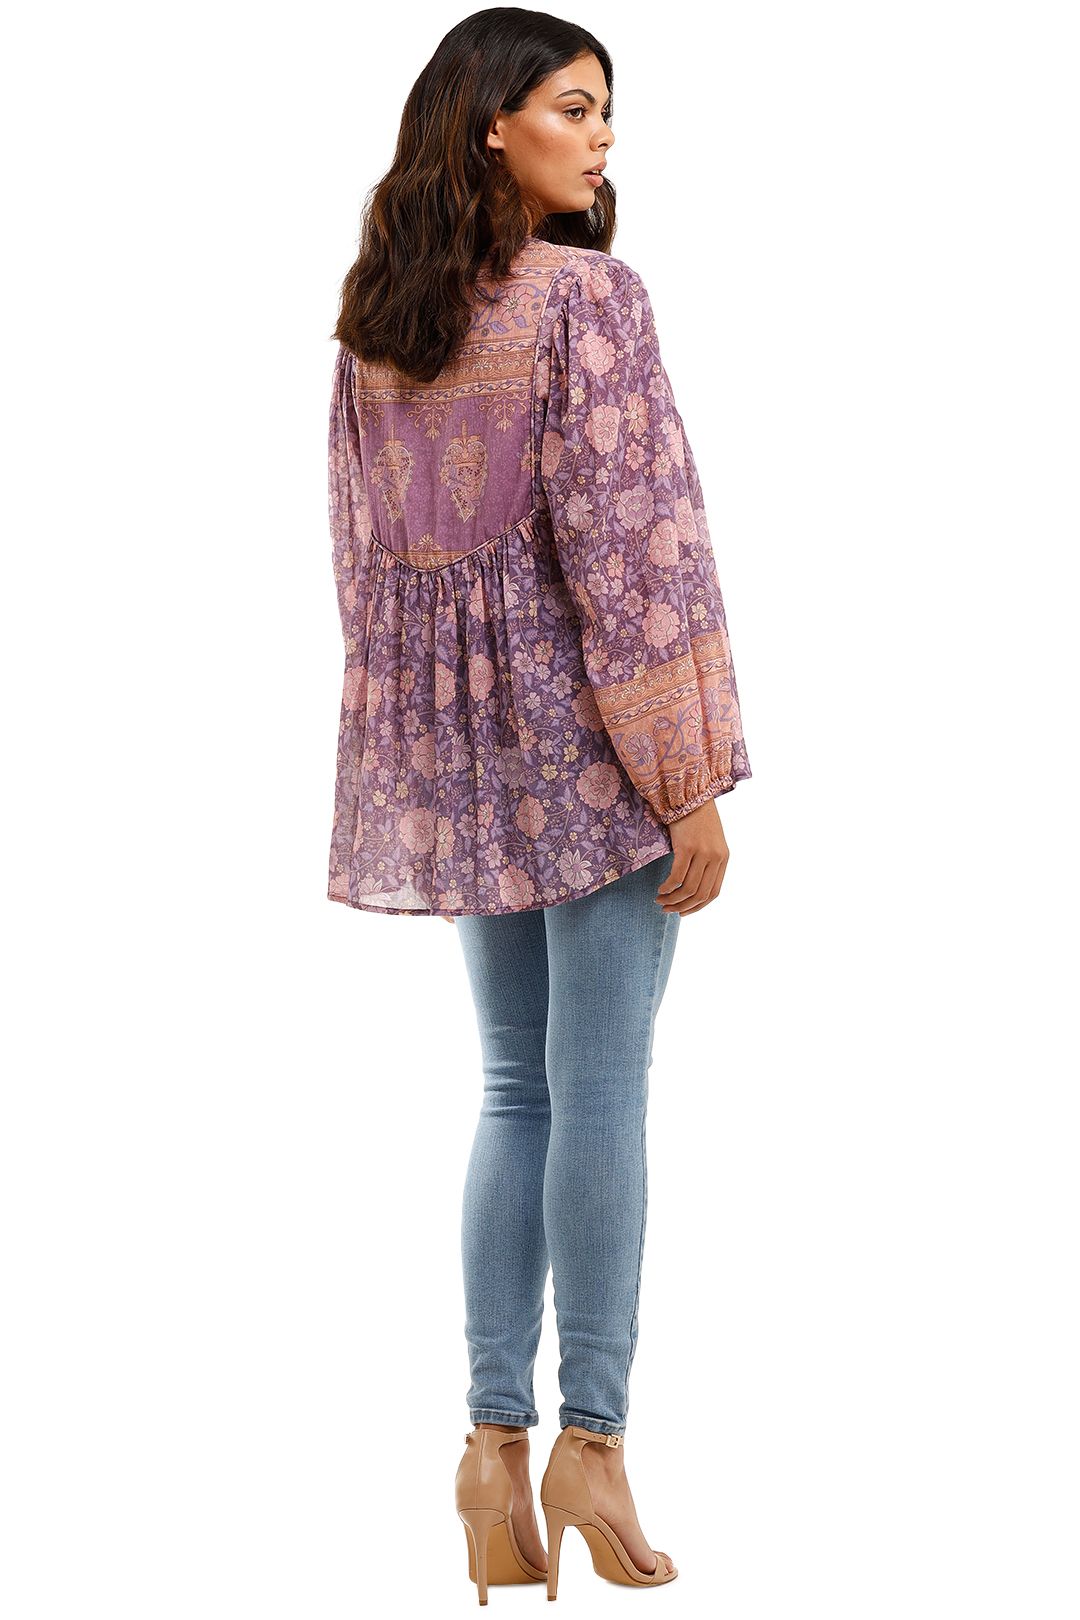 Spell Love Story Long Sleeve Blouse Royal Lilac Floral